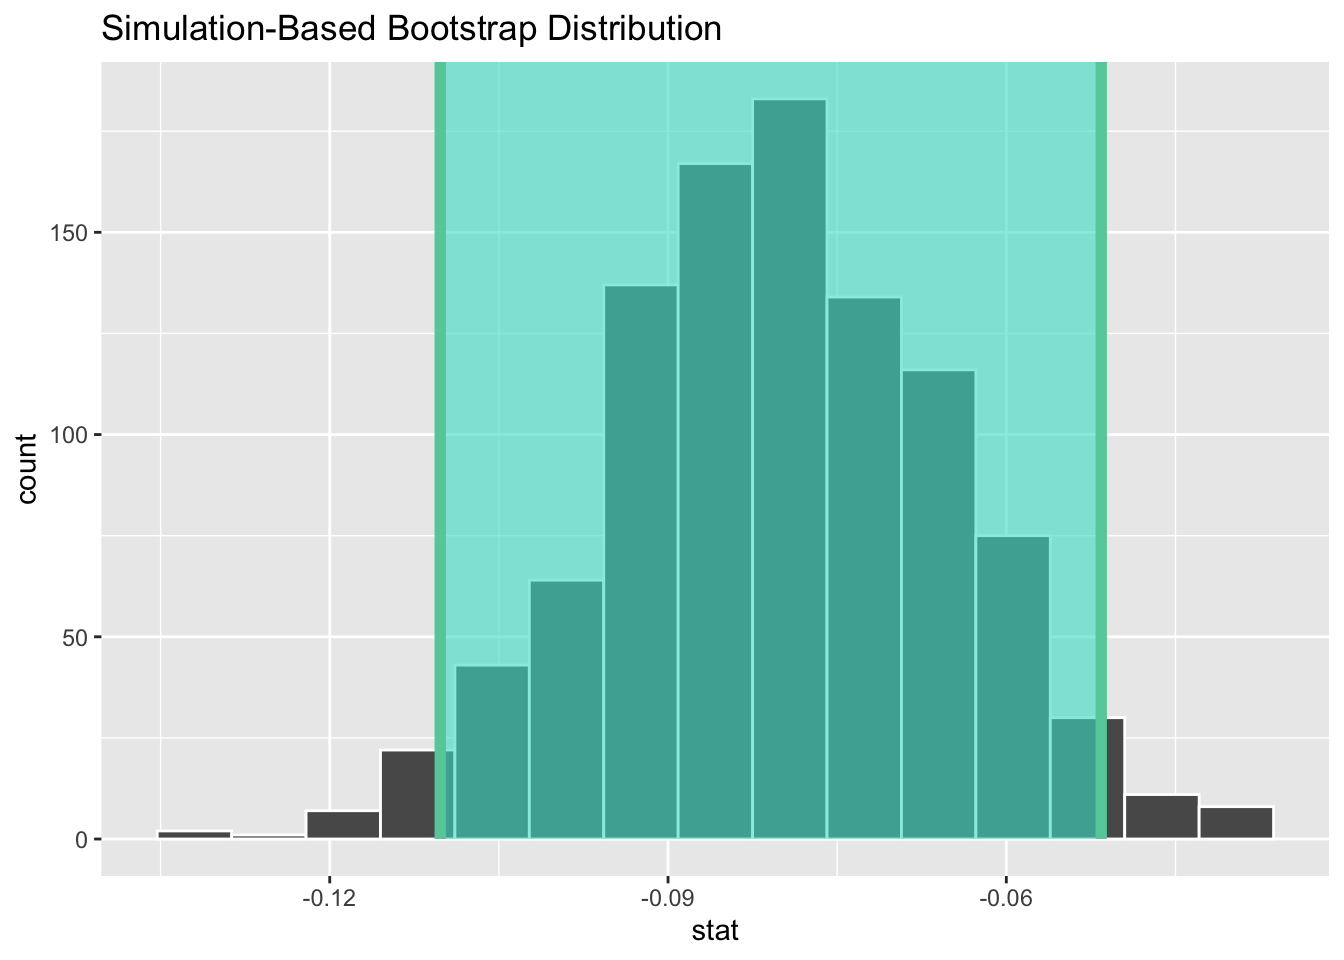 A bootstrap 95% confidence interval for the zinc concentration difference between surface and bottom water.